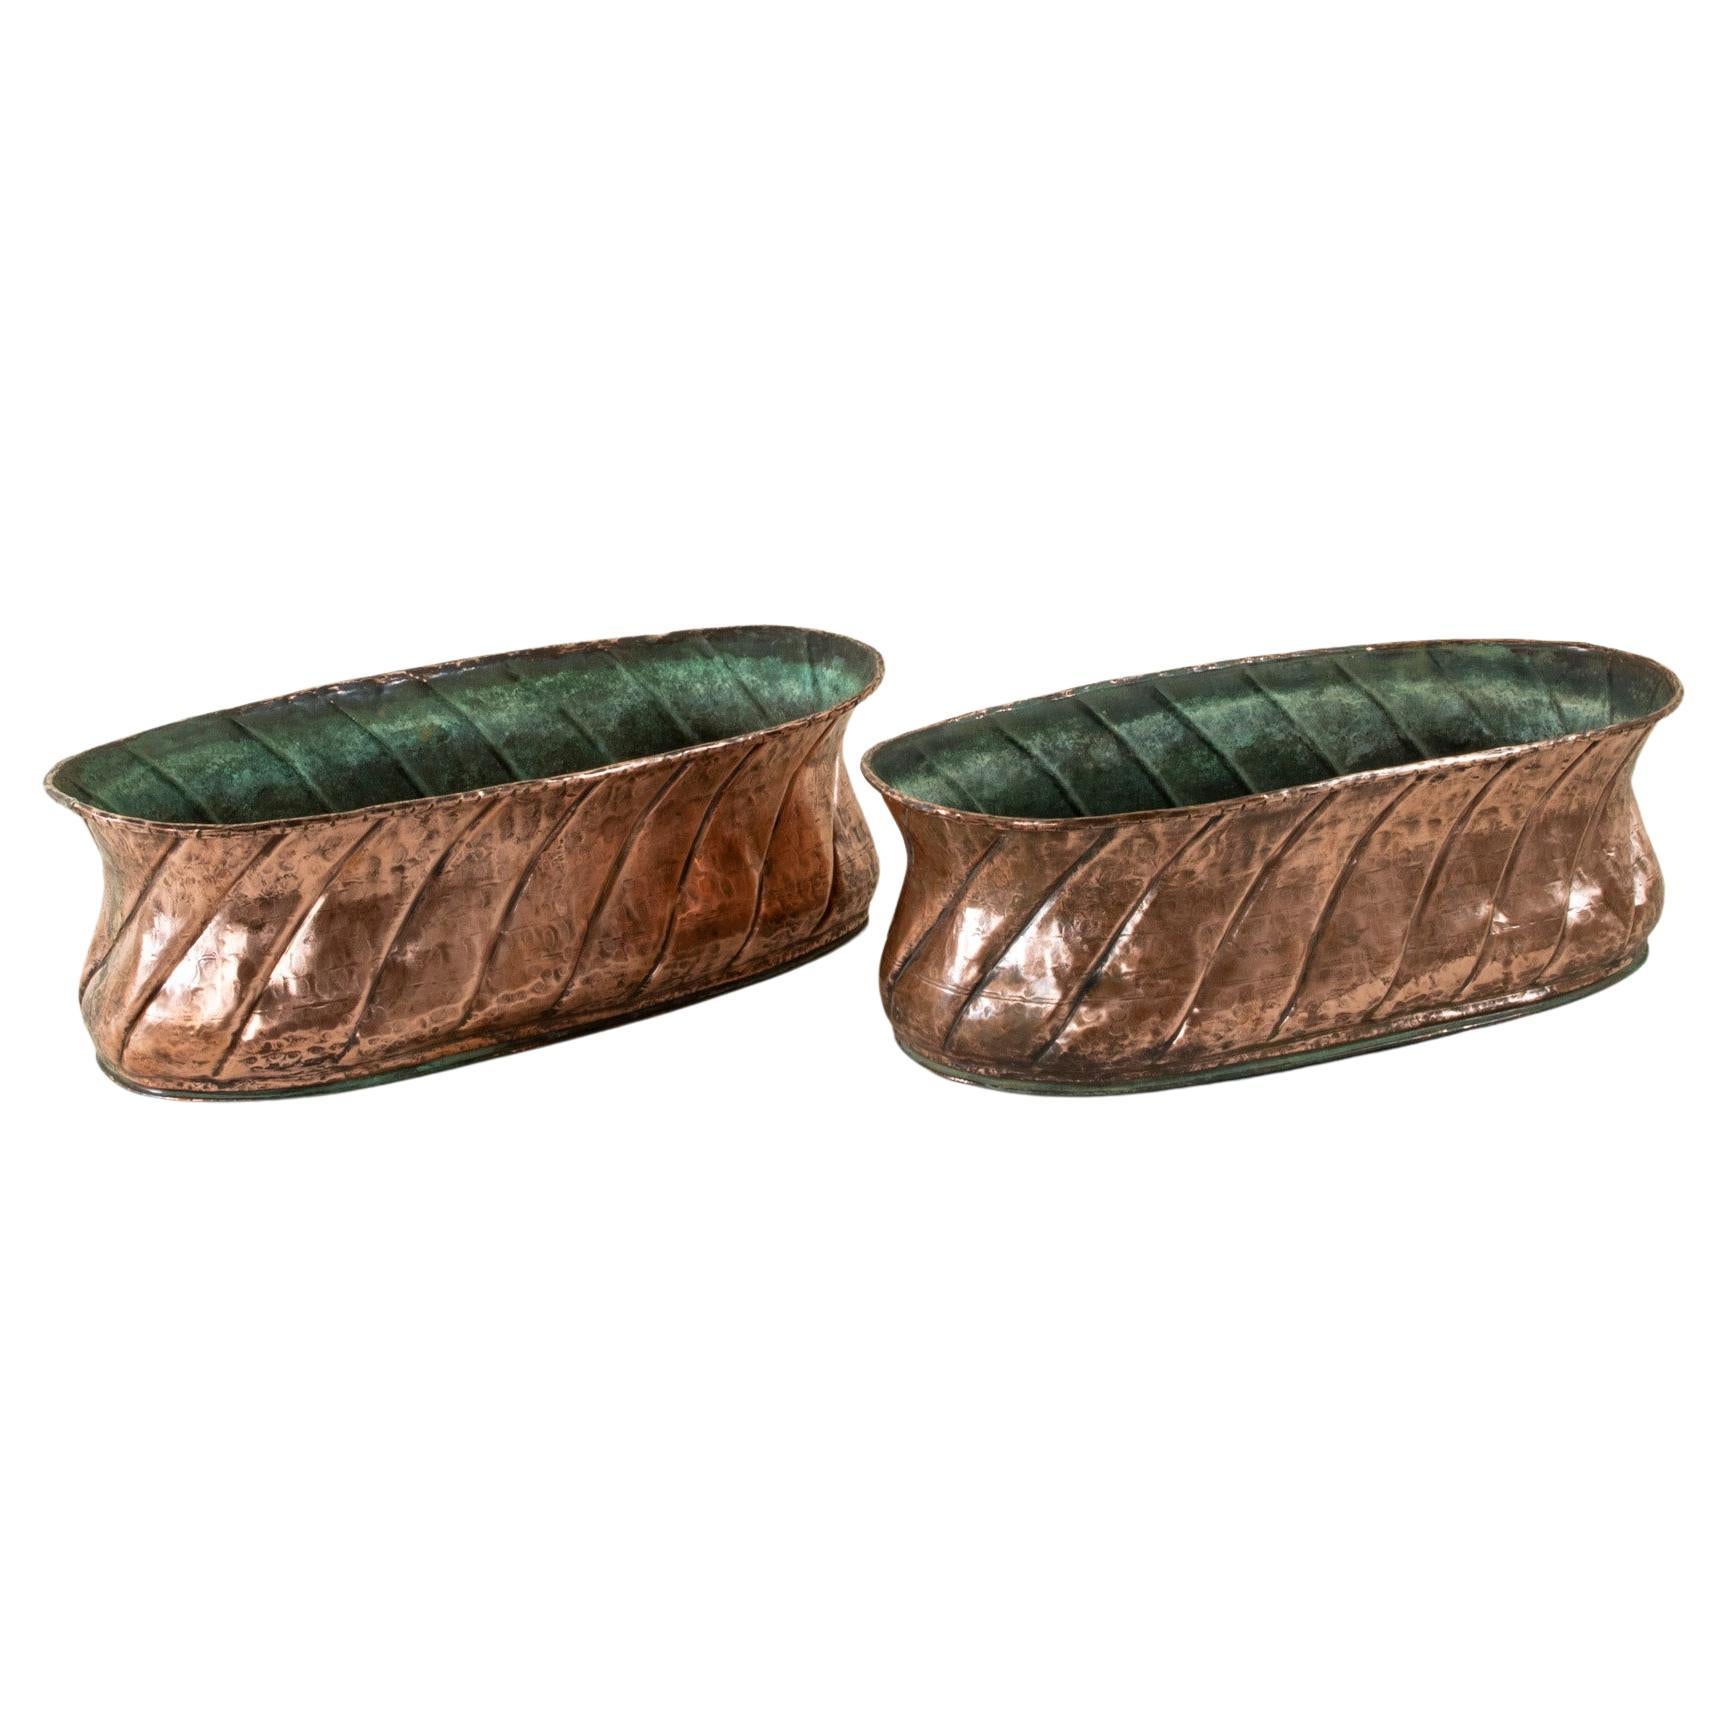 Pair of Late 19th Century French Hand-Hammered Copper Jardinières or Planters For Sale